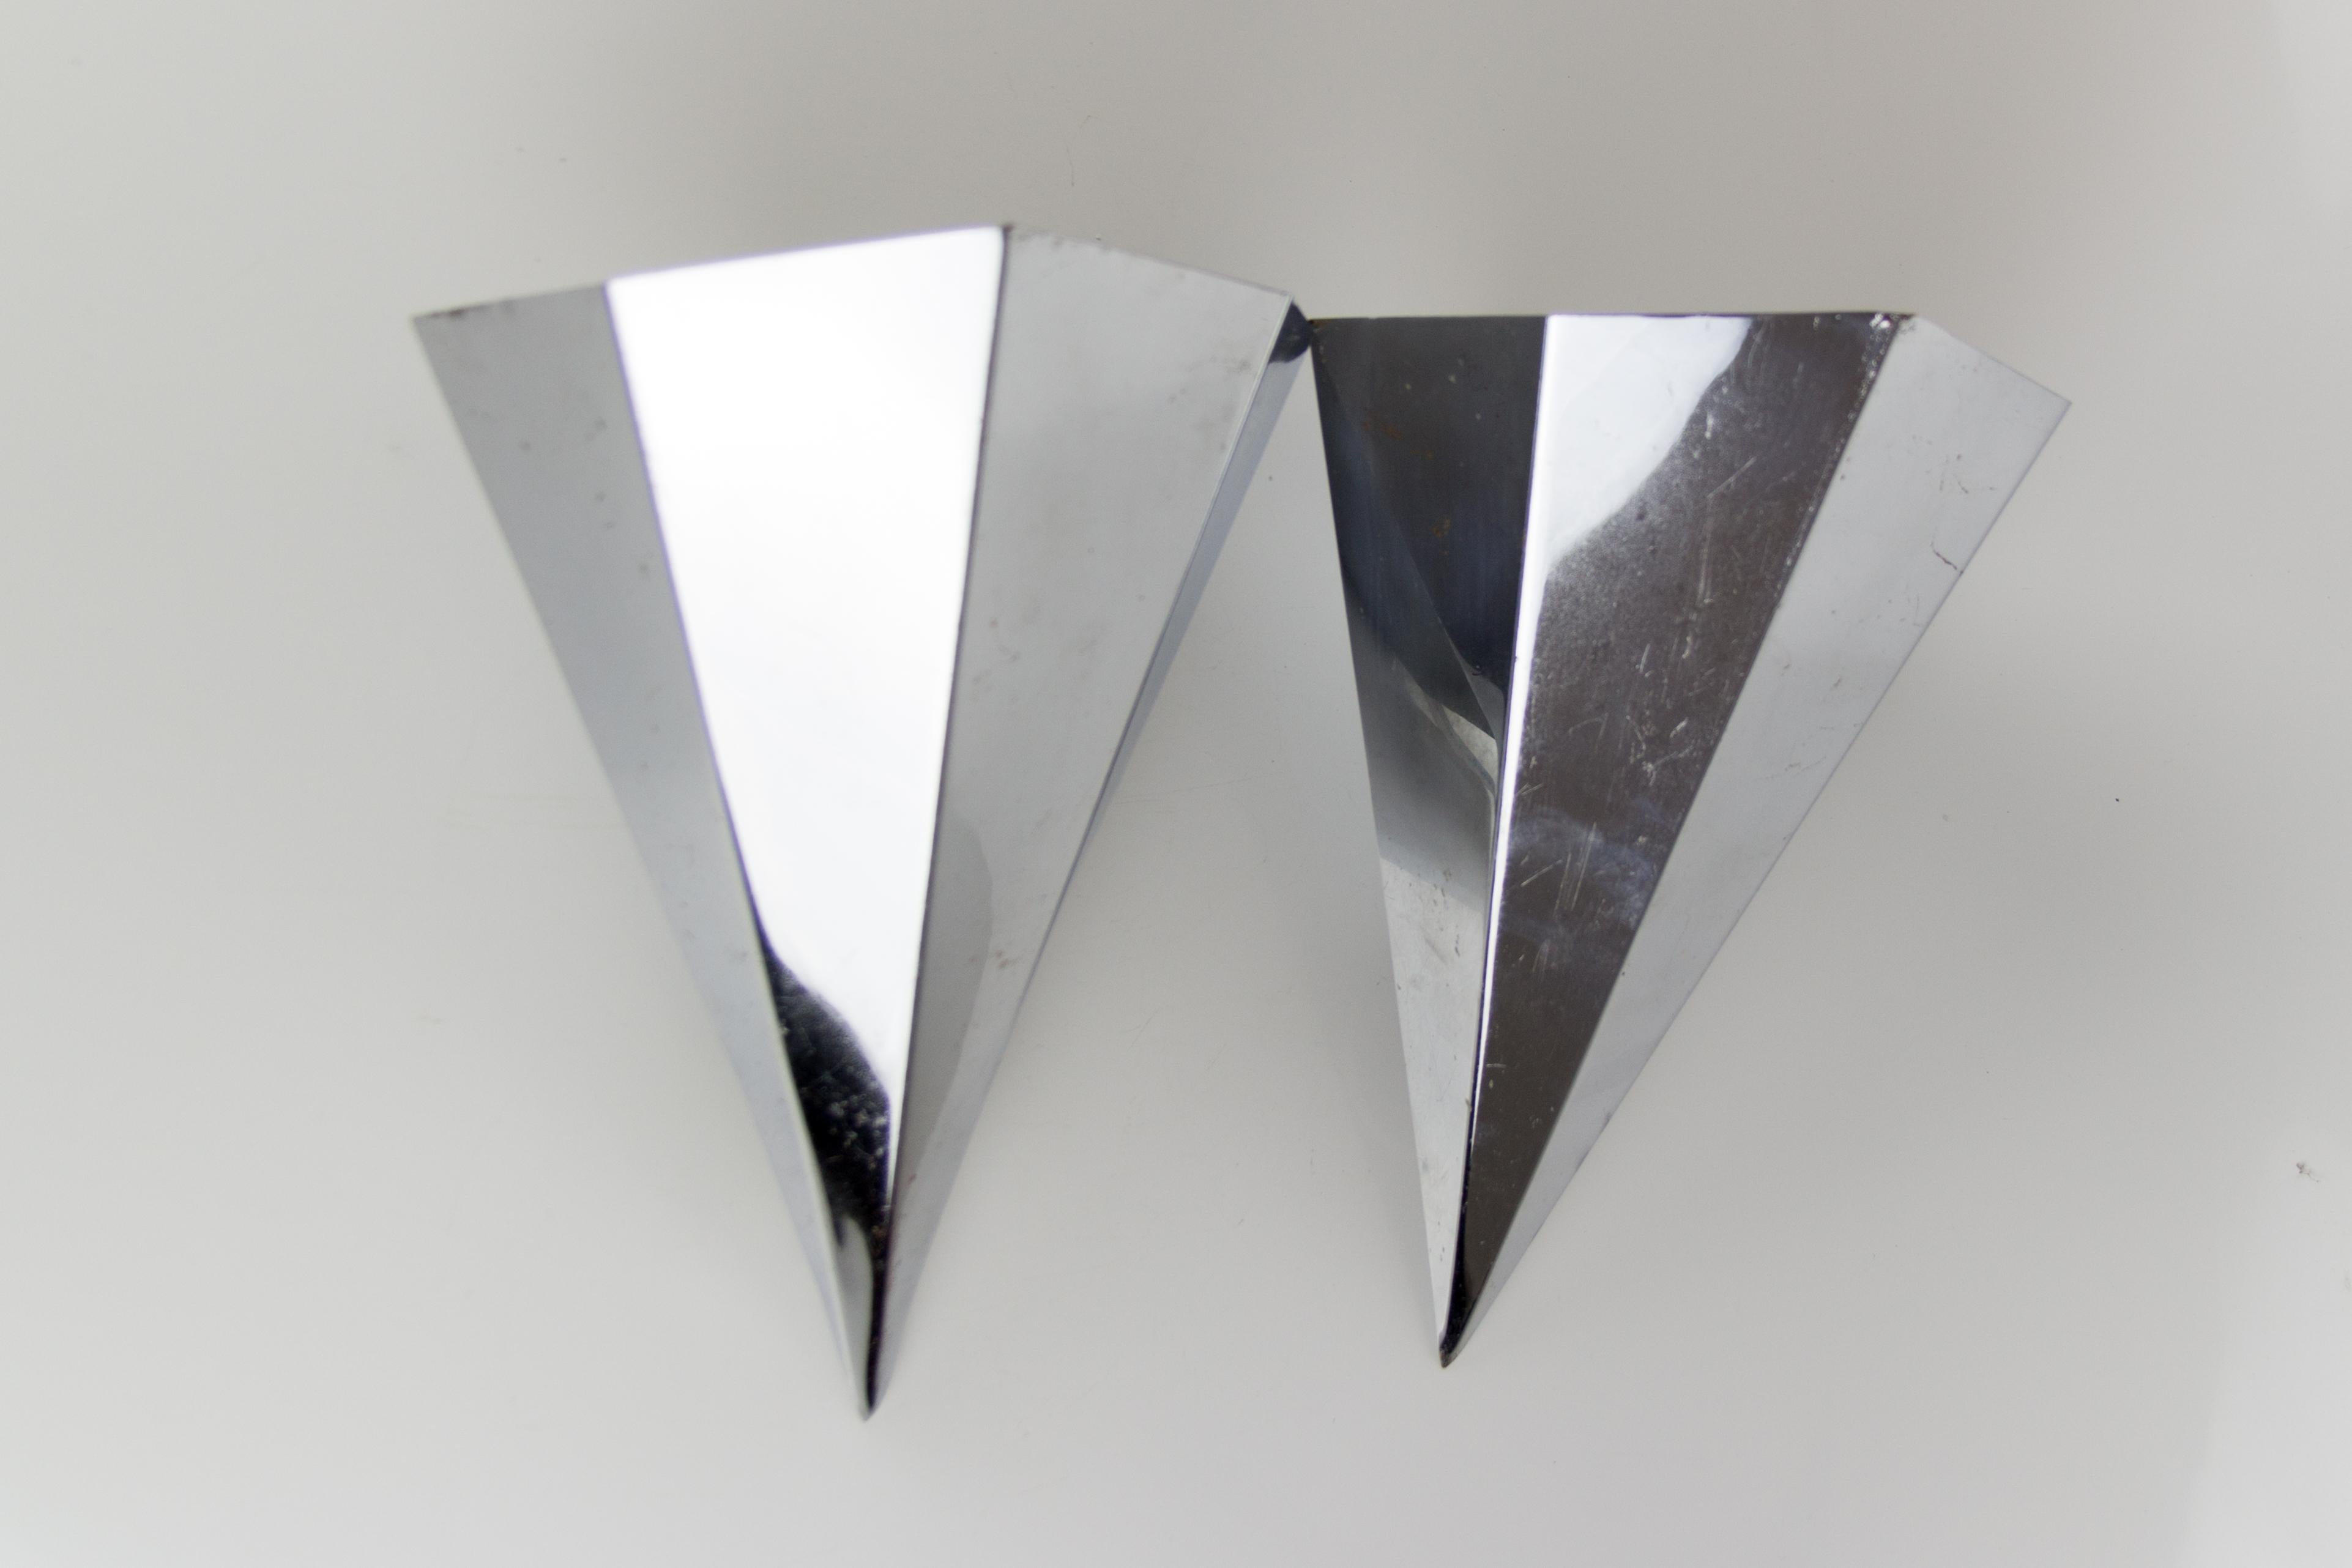 Pair of Art Deco Nickel-Plated Metal Prism Corner Wall Sconces, France, 1920s For Sale 1